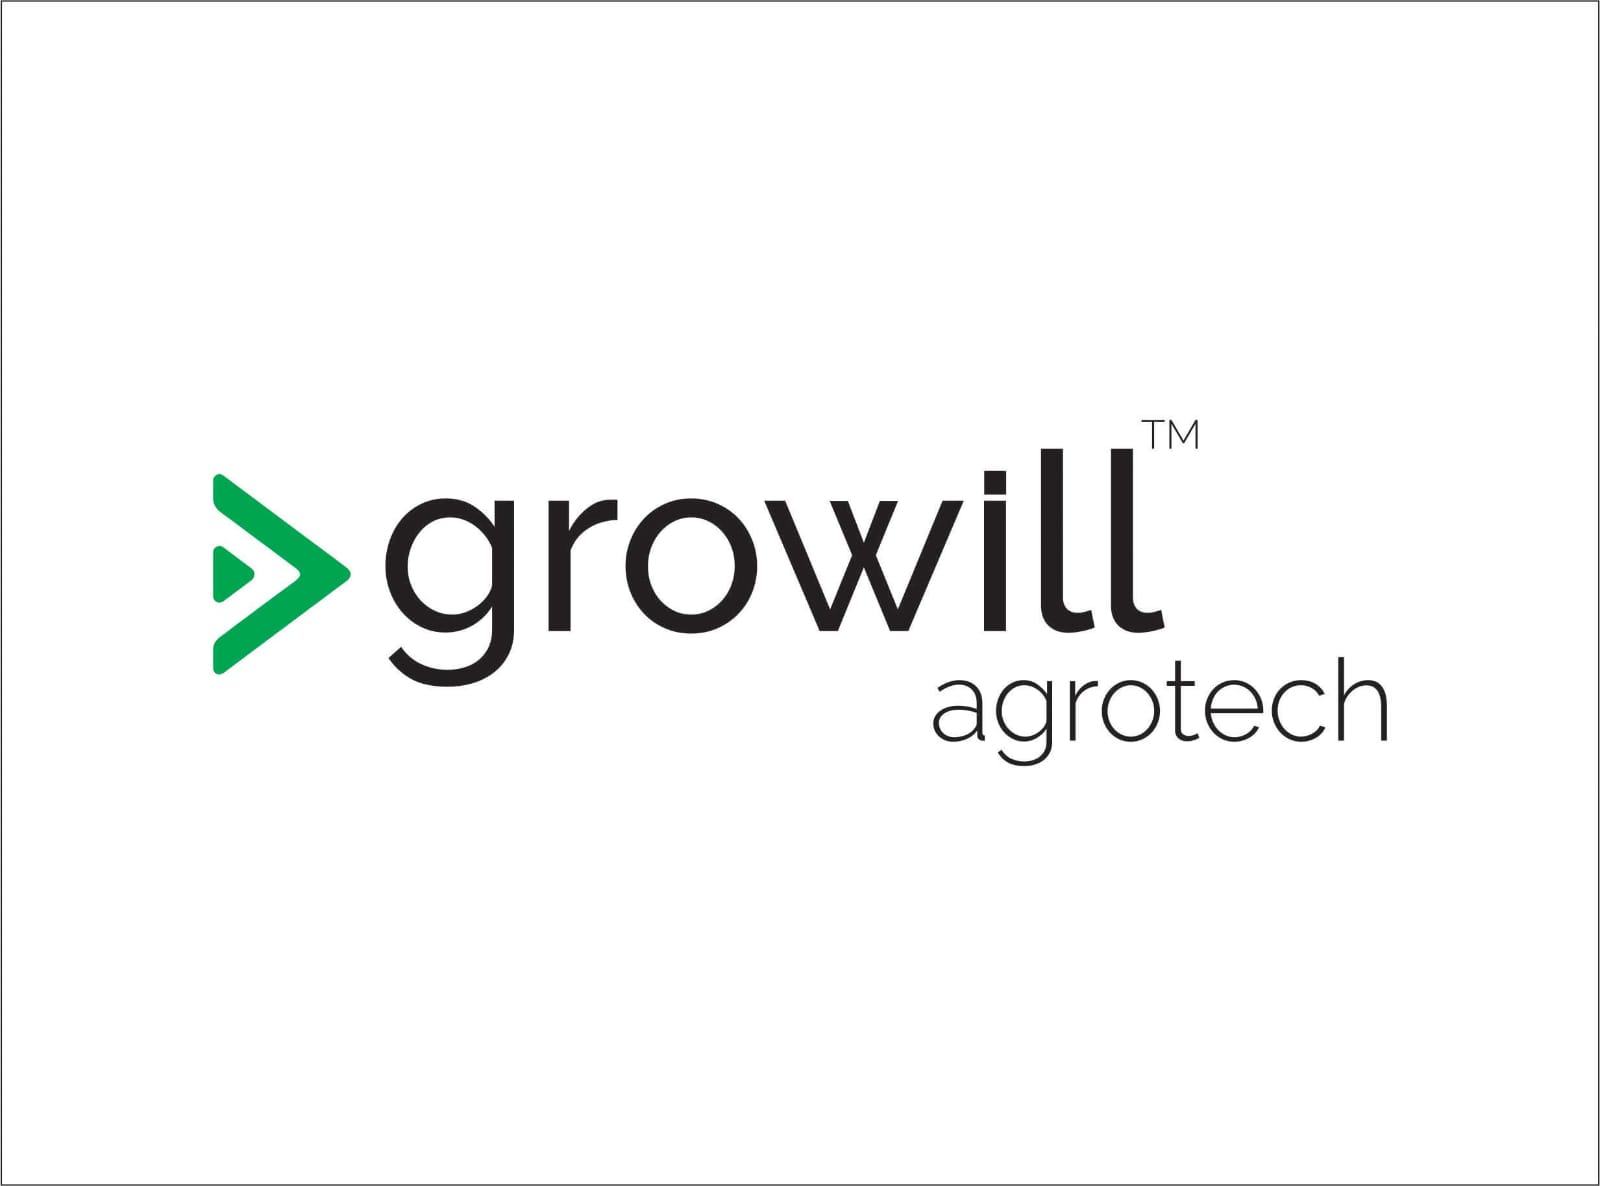 GROWILL AGROTECH